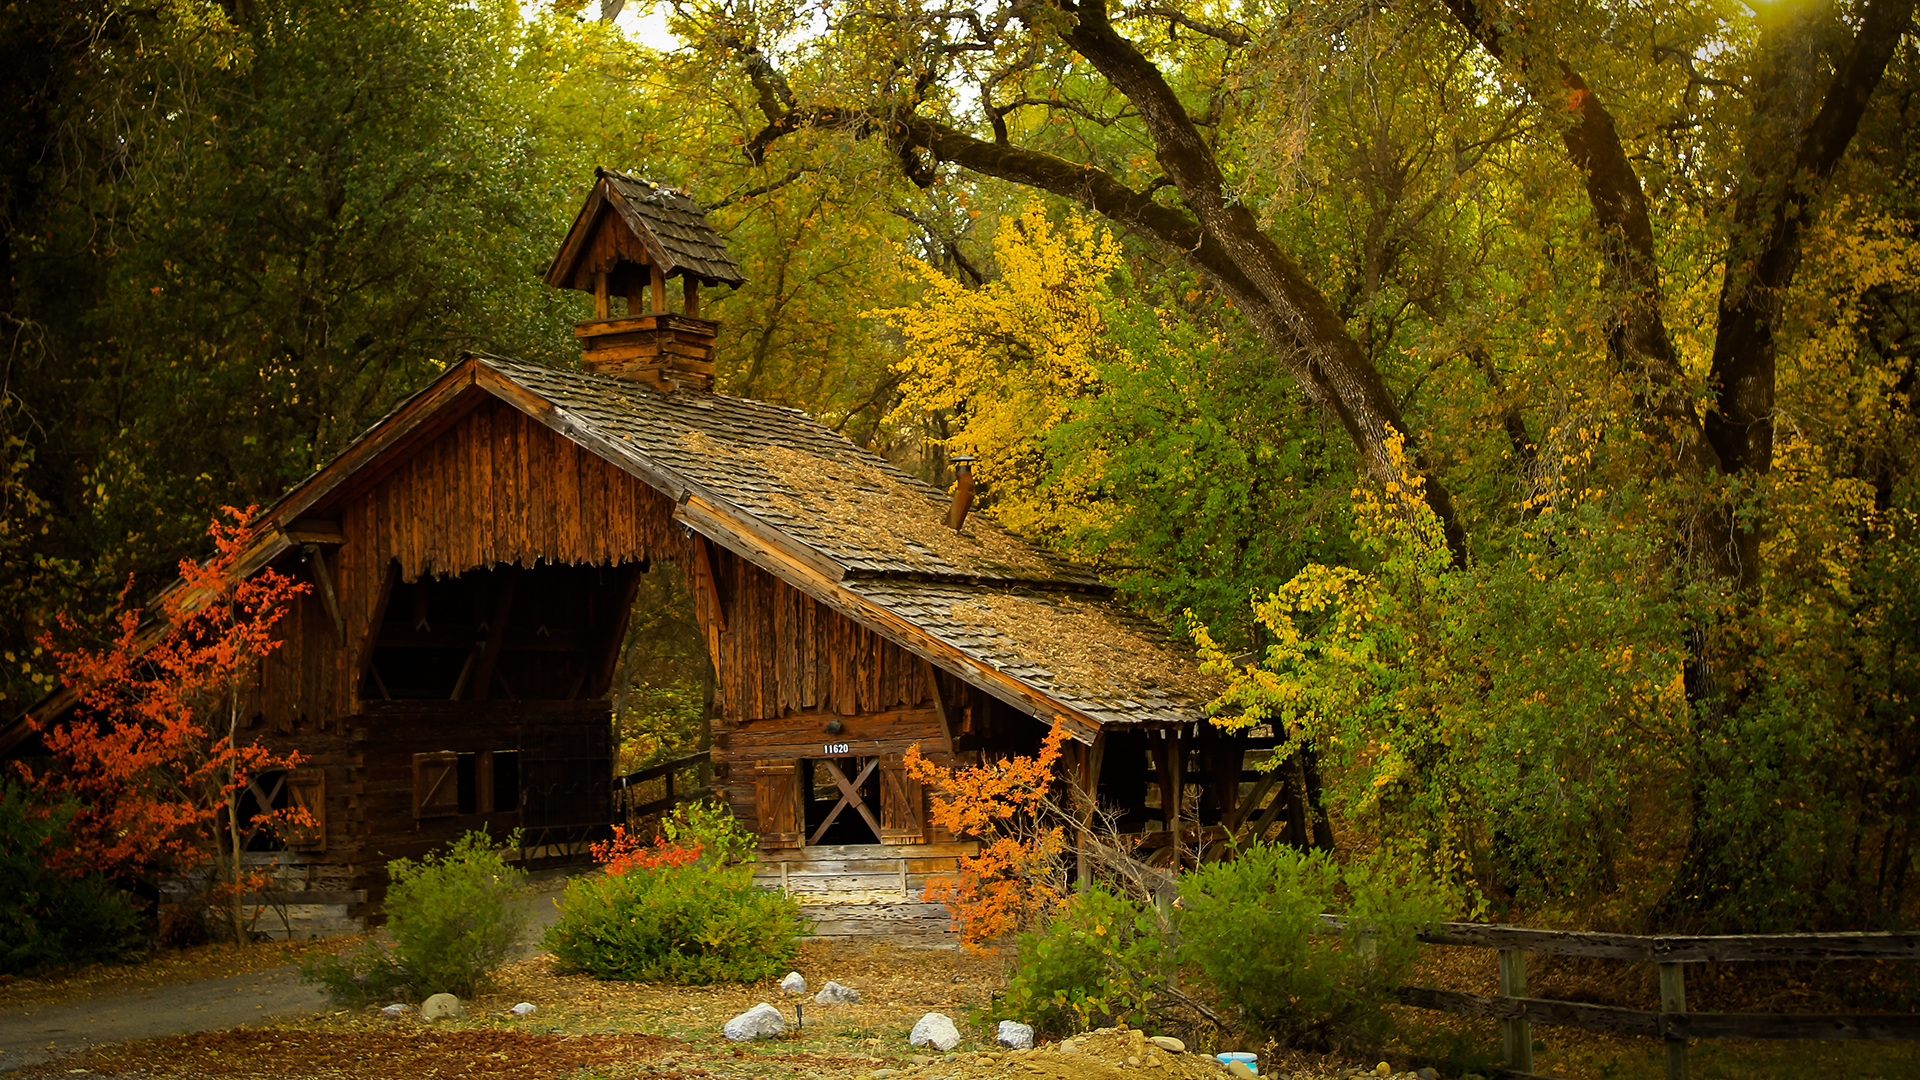 Wallpaper Cabin Posted By John Simpson